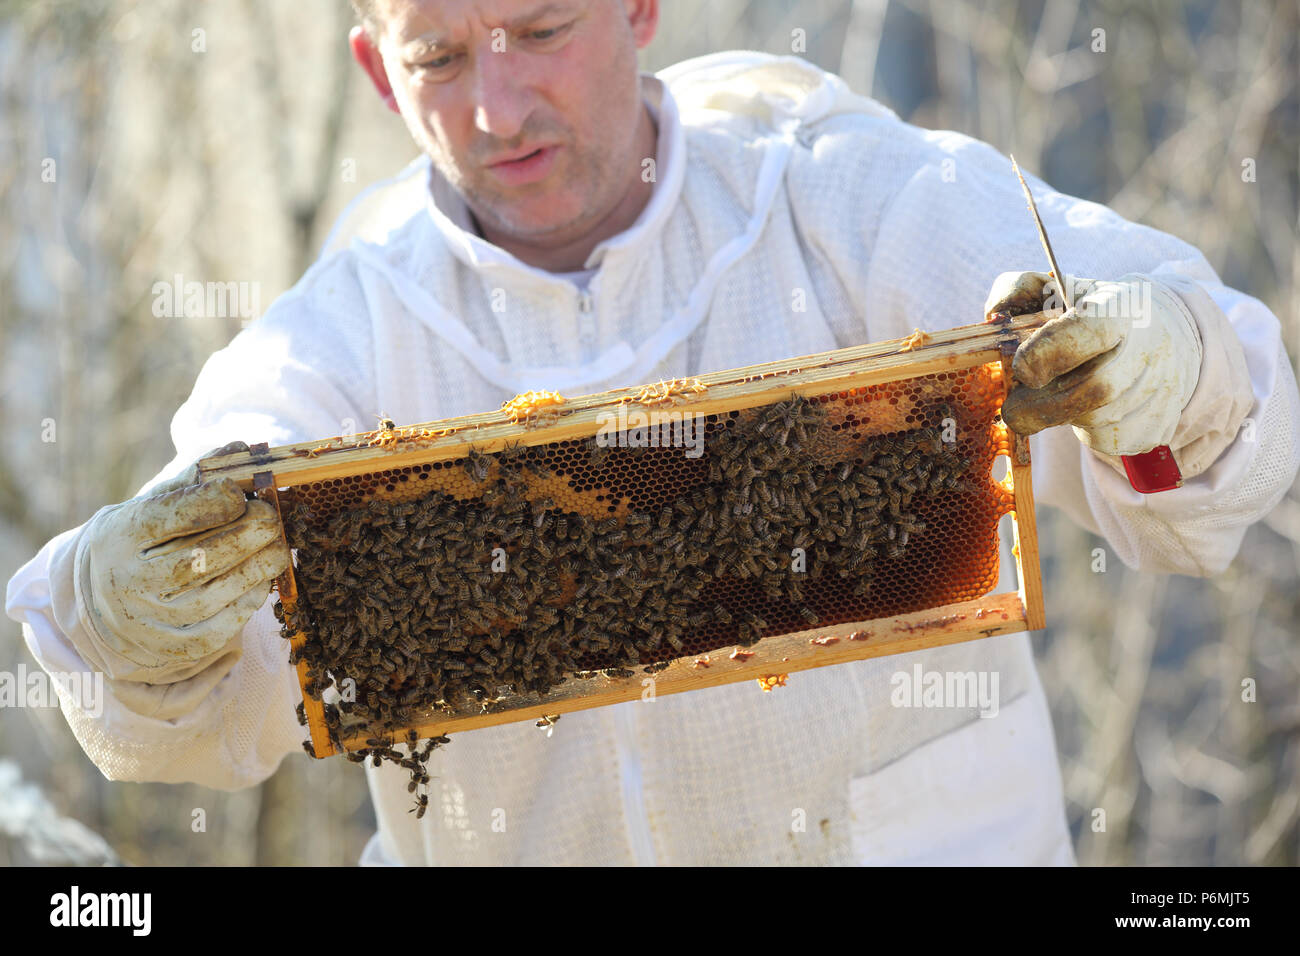 Berlin, Germany - beekeeper controls a honeycomb of his bee colony Stock Photo